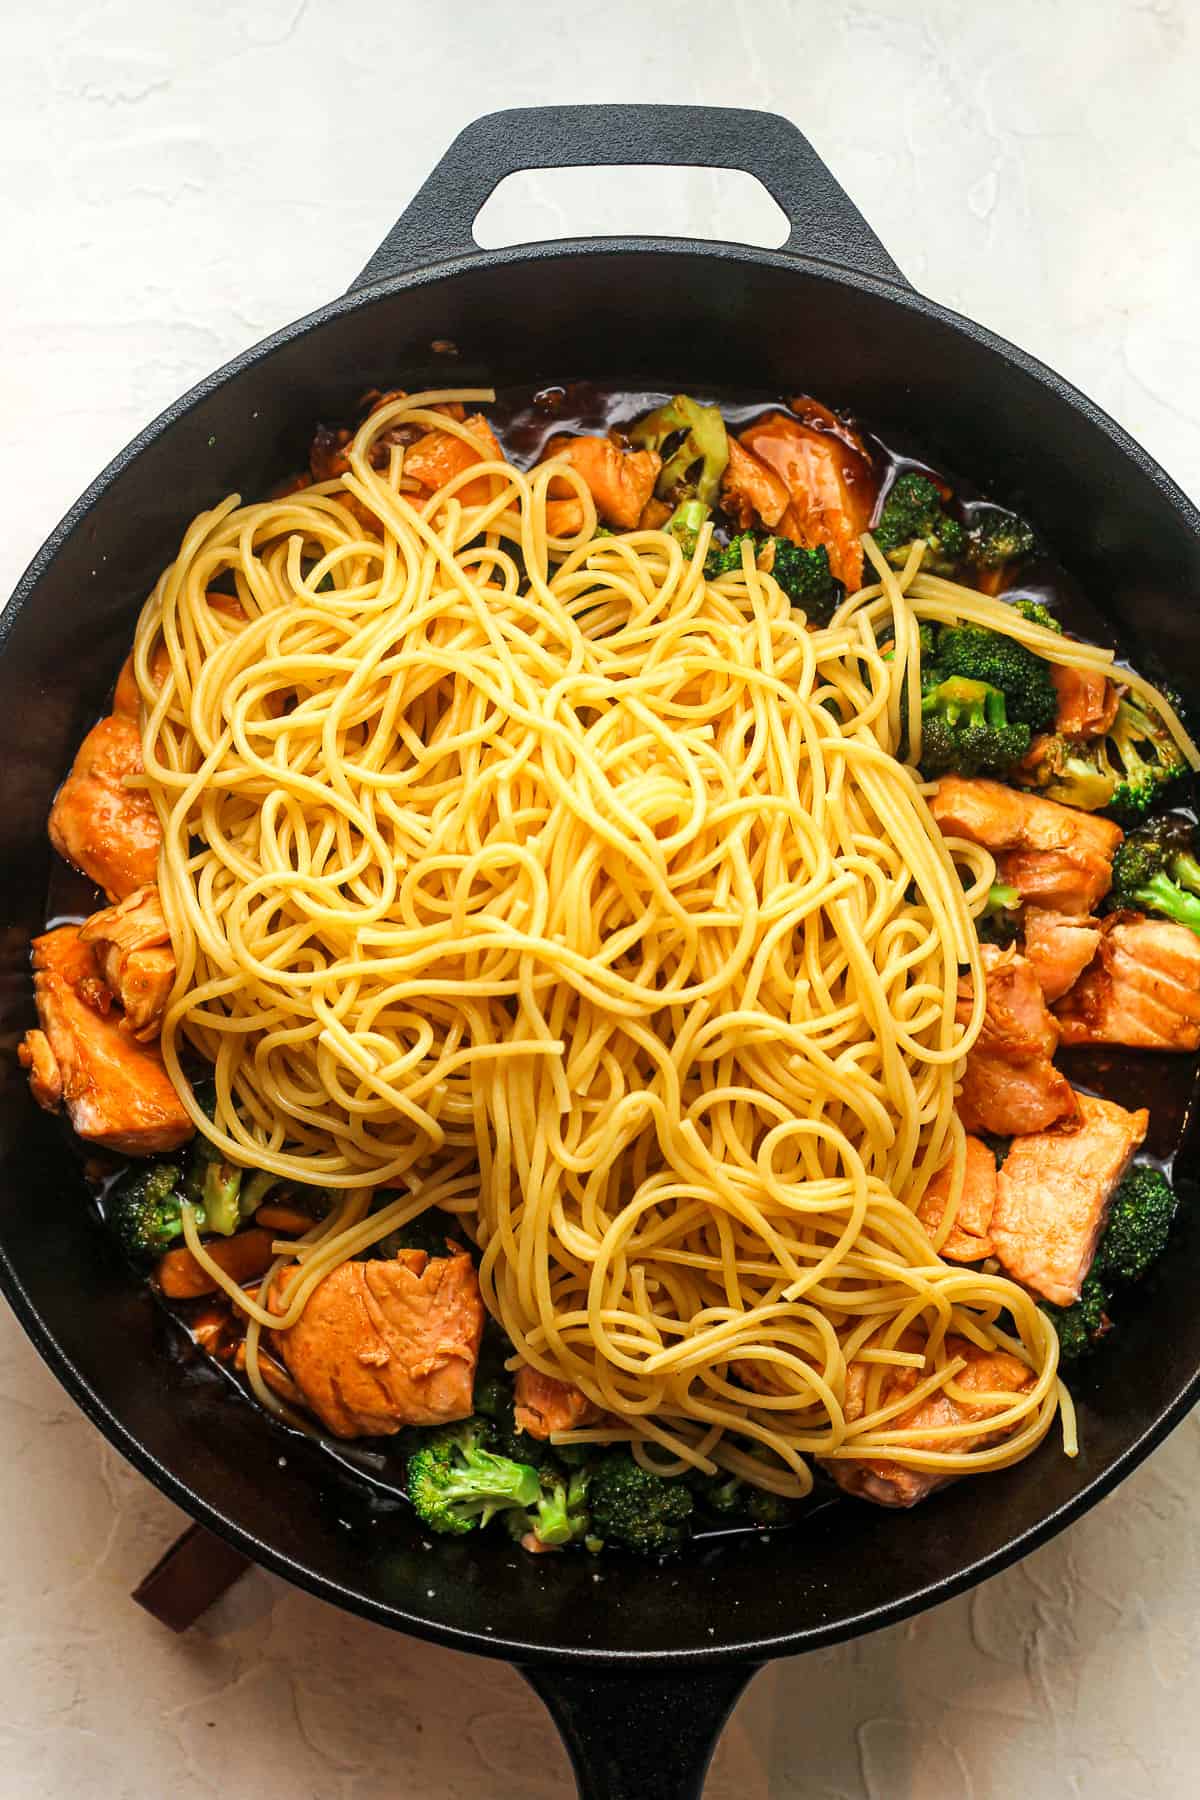 A skillet of teriyaki salmon and broccoli with noodles on top.